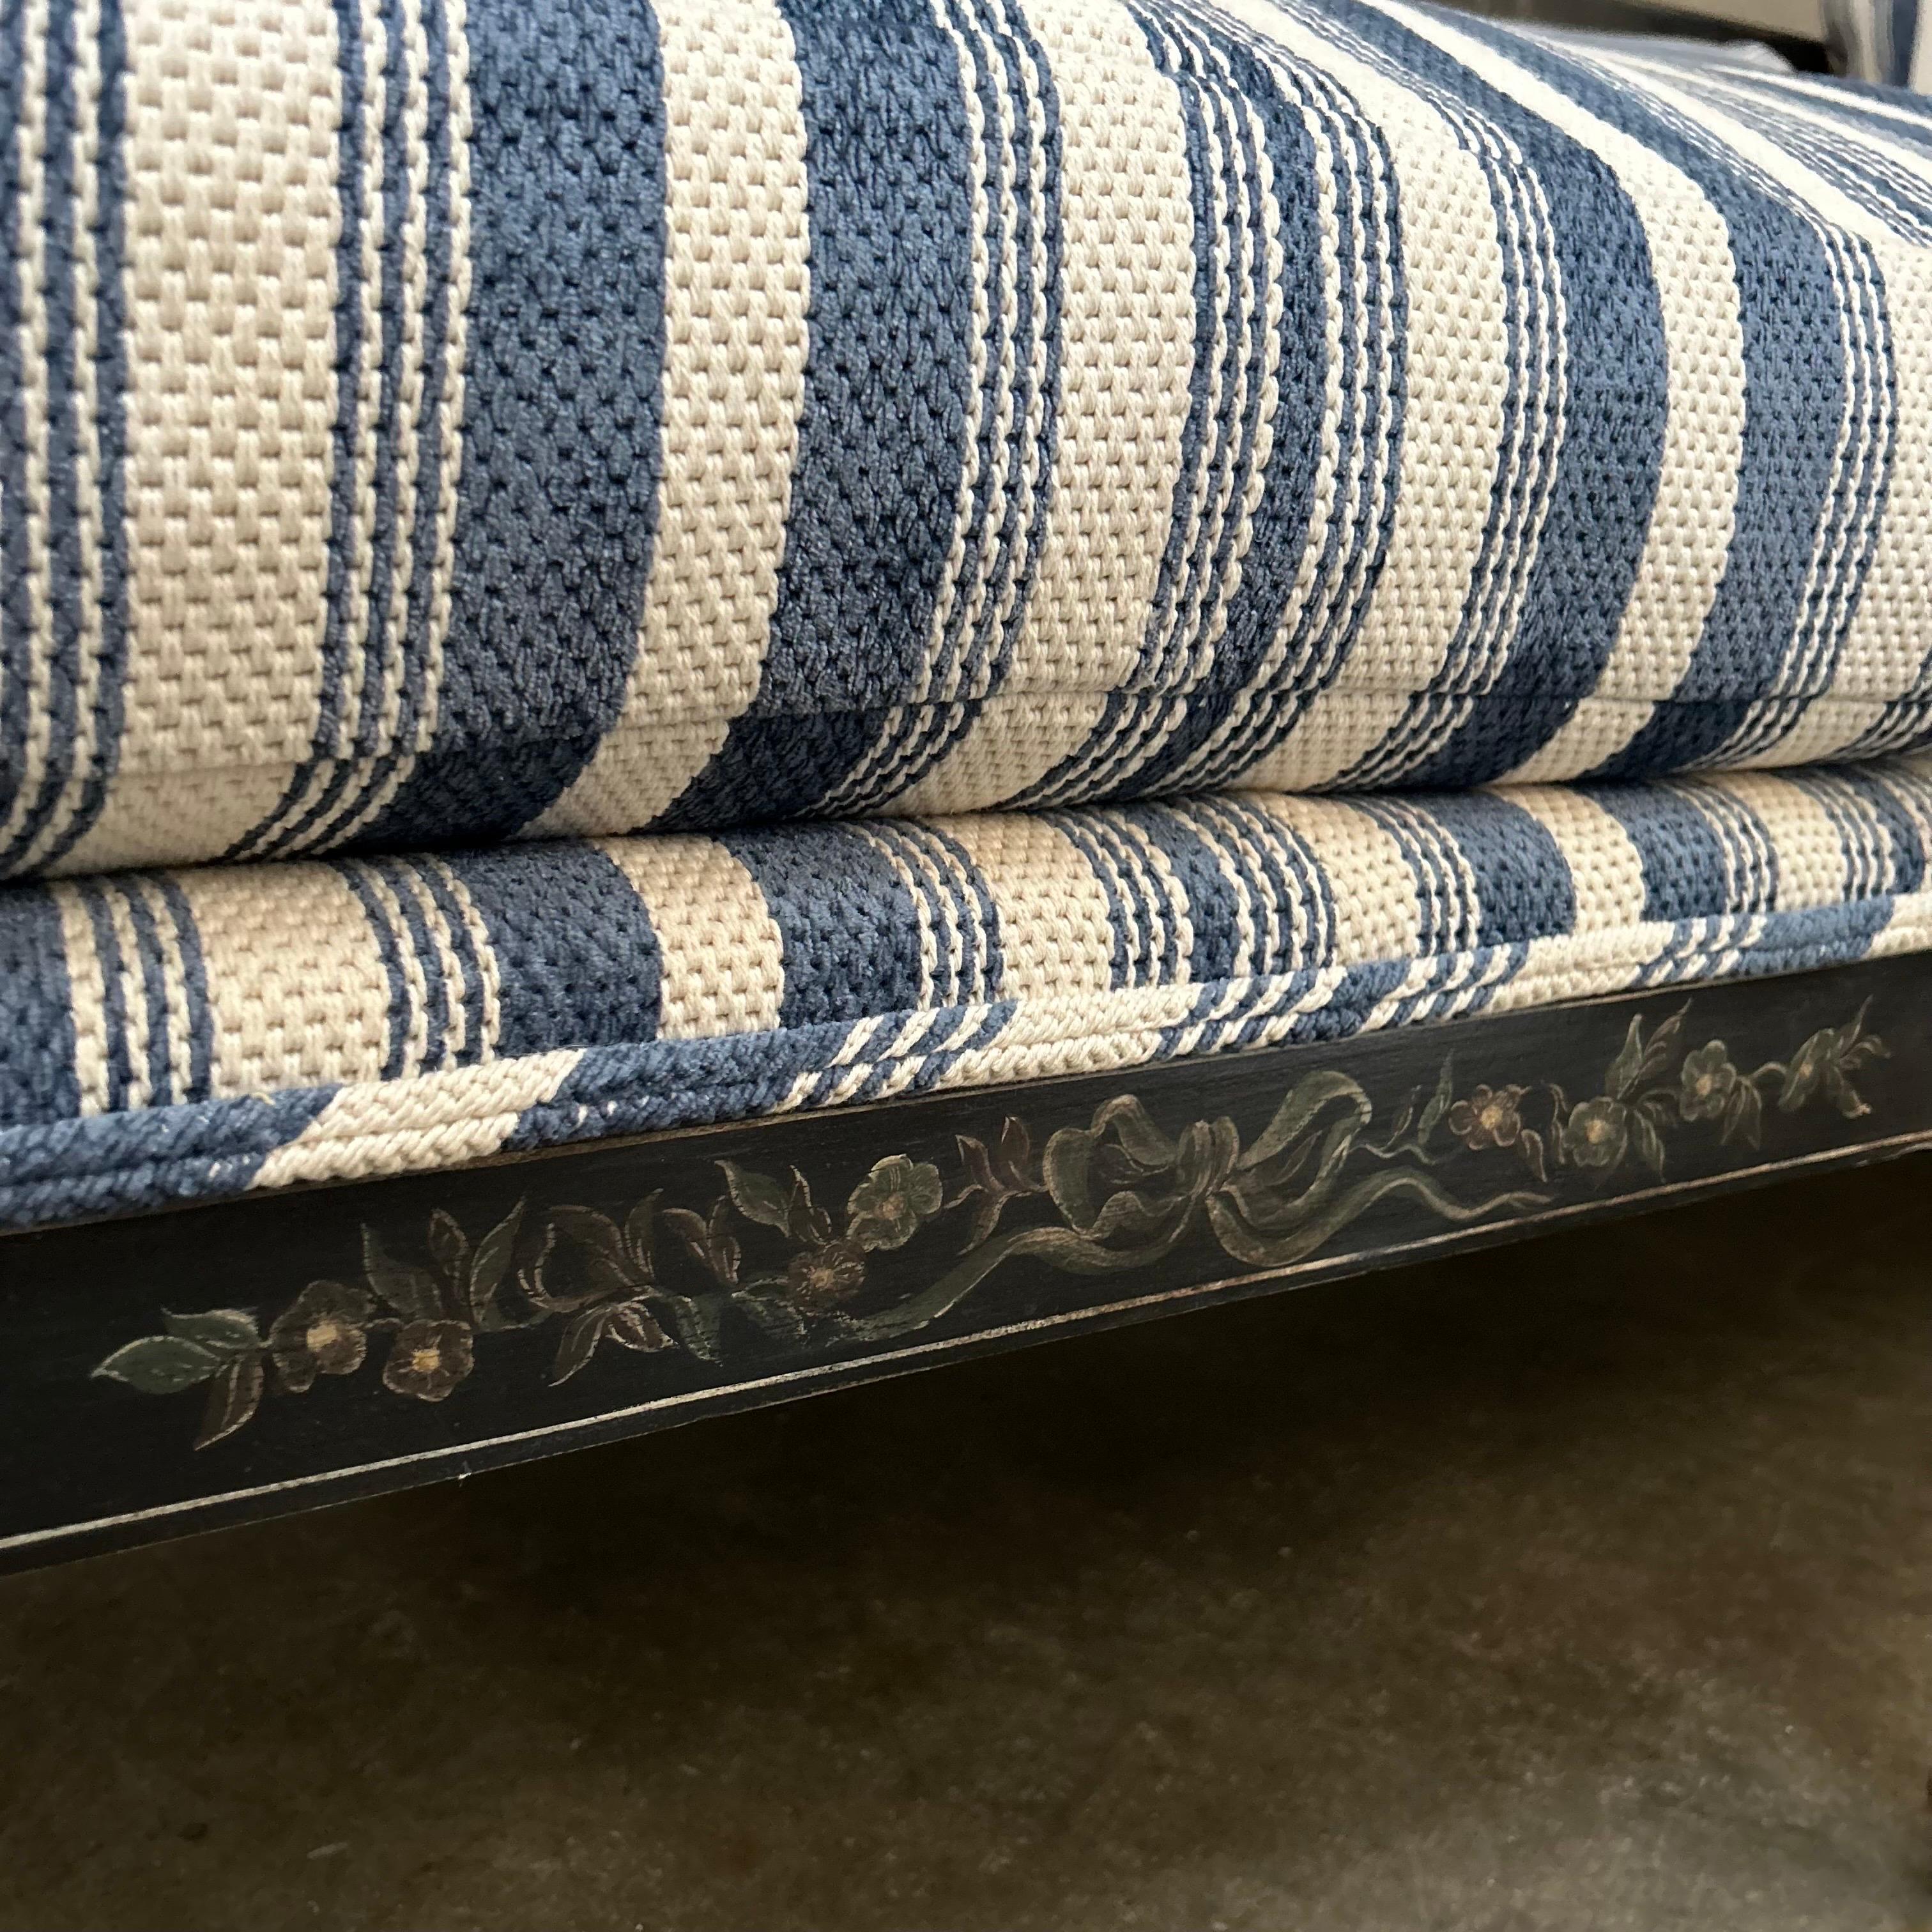 Antique Black Hand Painted Cane Daybed Sofa with Blue Ticking Upholstery For Sale 4